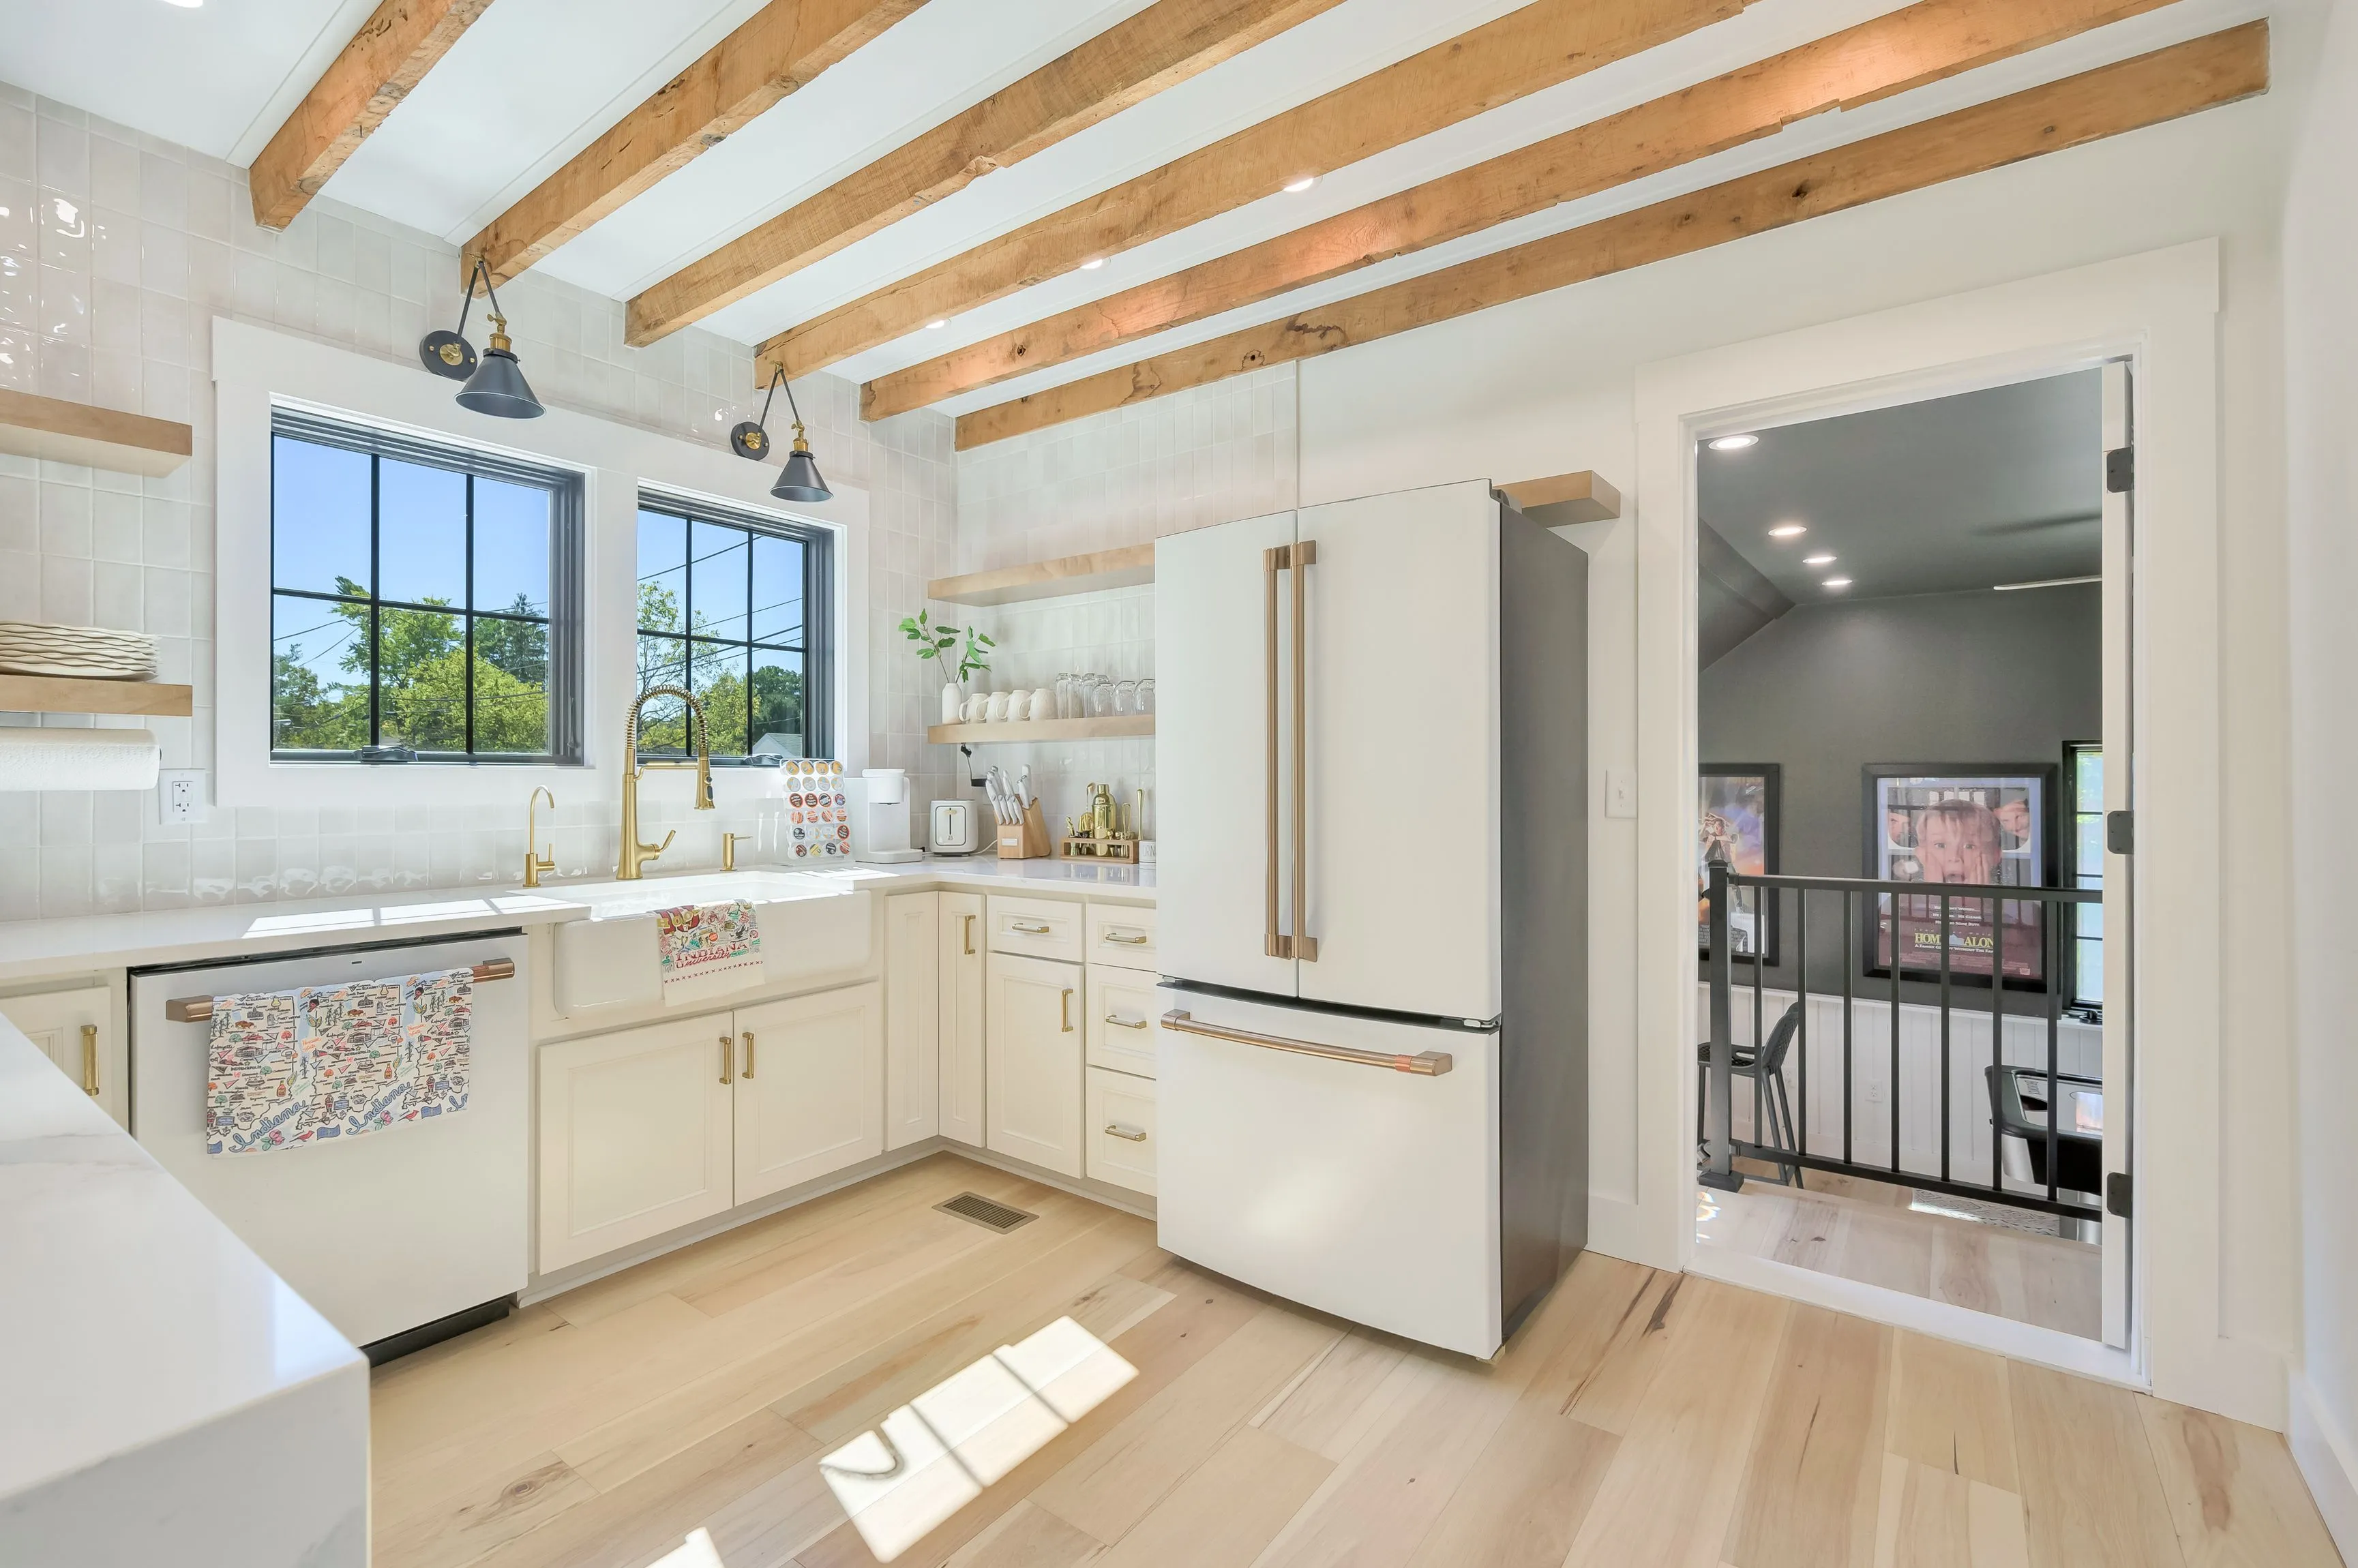 Bright modern kitchen with wooden beams, white cabinetry, stainless steel appliances, and an open doorway leading to an adjacent room.